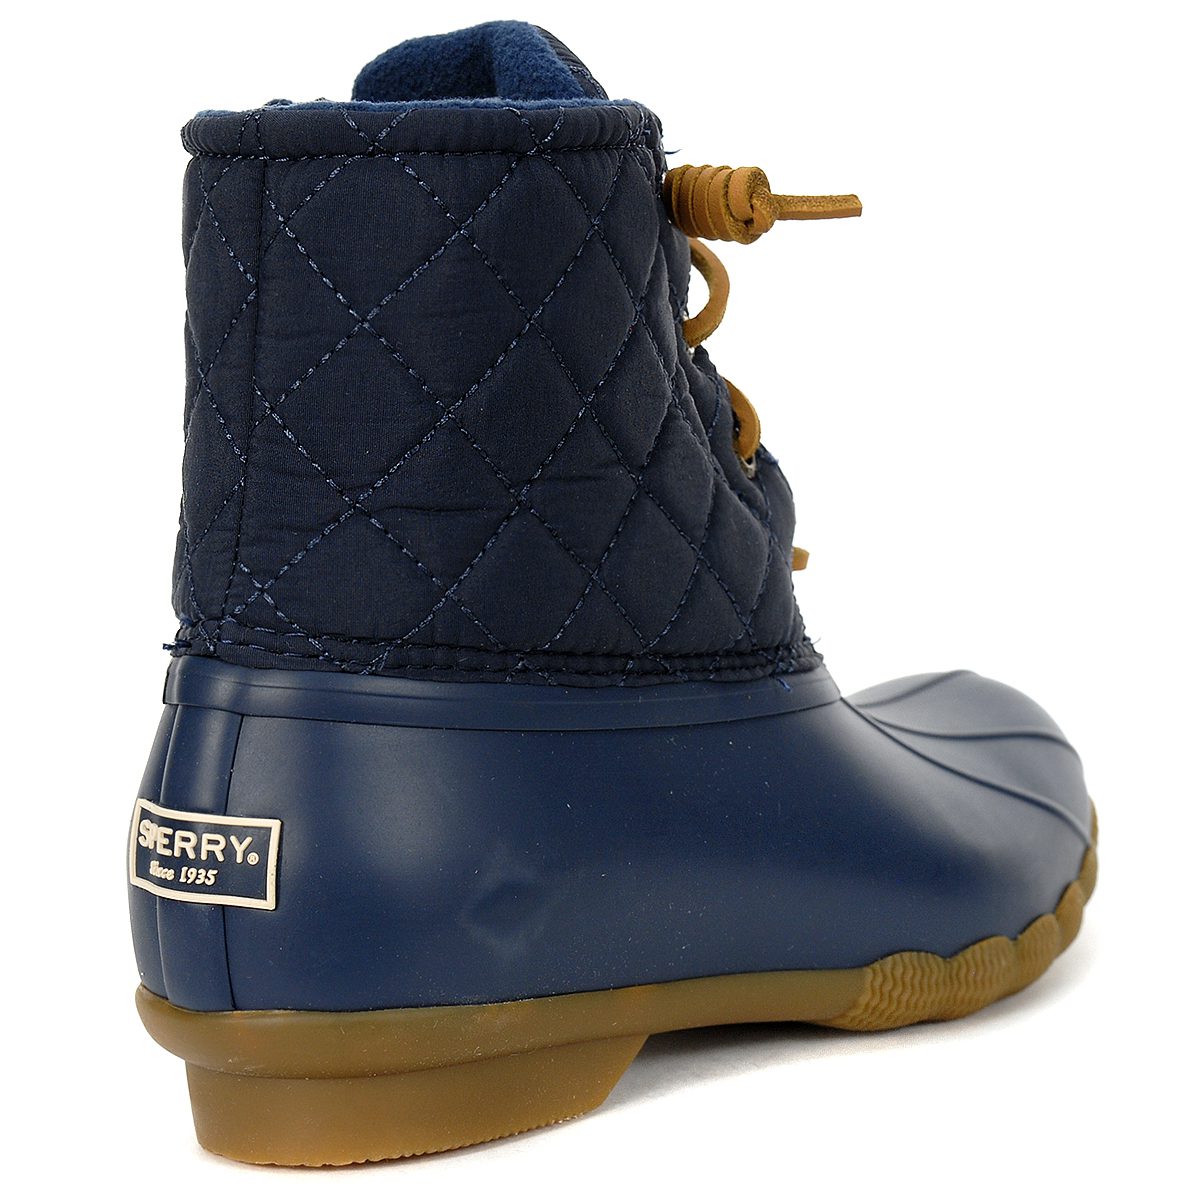 Sperry Women's Saltwater Quilted Duck Boot Navy STS85132 - WOOKI.COM